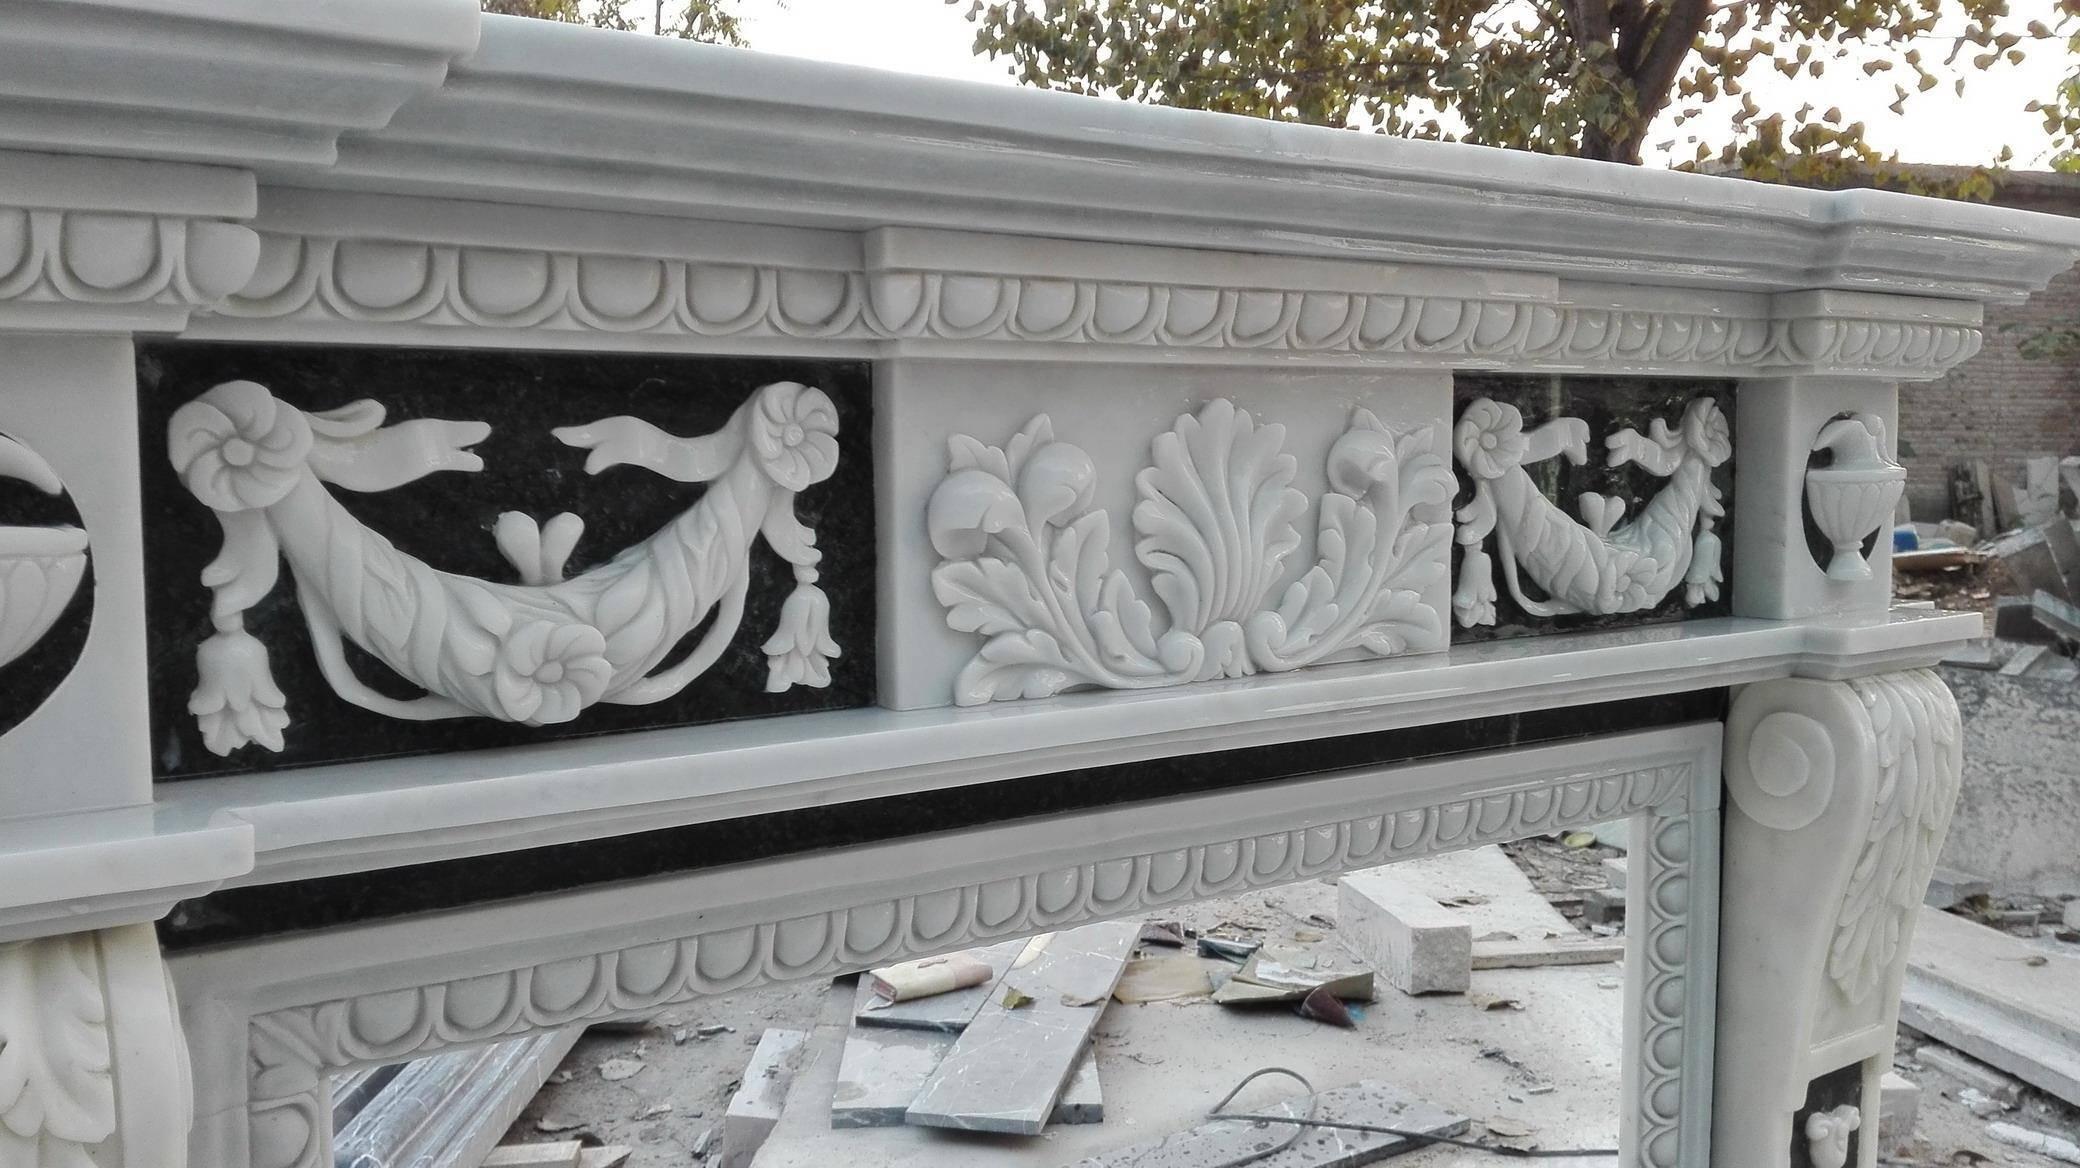 Measures: Width 150 cm 59 in
Depth 29 cm 11 1/2 in
Height 115 cm 45 1/4 in
Opening 83 x 74 (H) cm 32 3/4 x 29 (H) in



Composition 
Black and white marble

Antique style


Carved marble fire surround in an antique style.



 